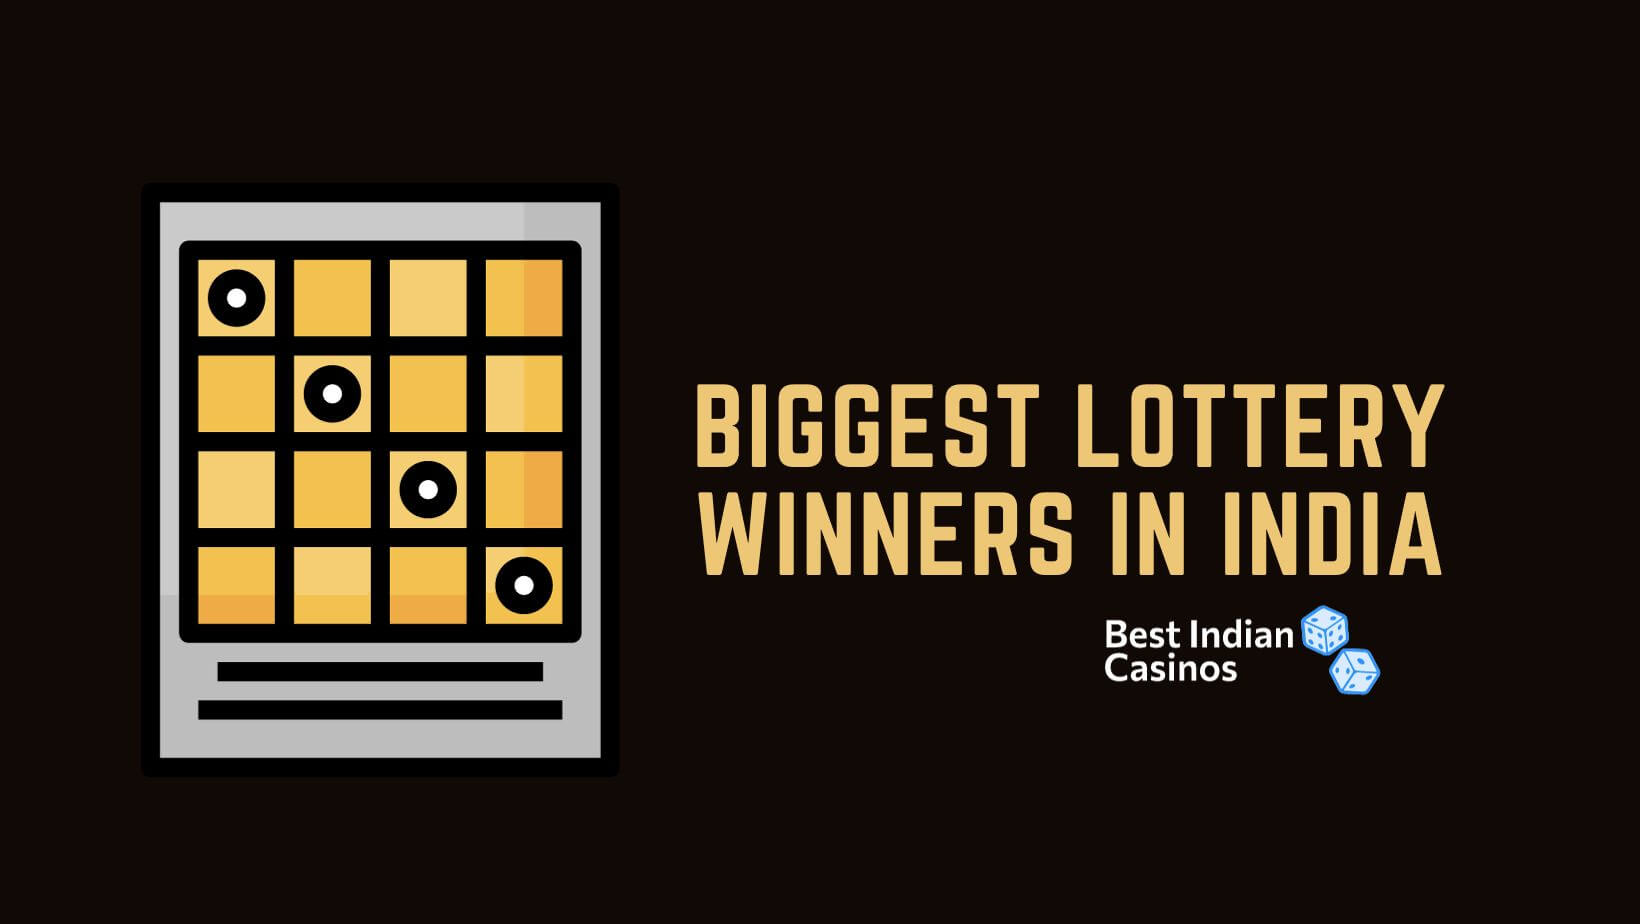 Biggest Lottery Winners in India